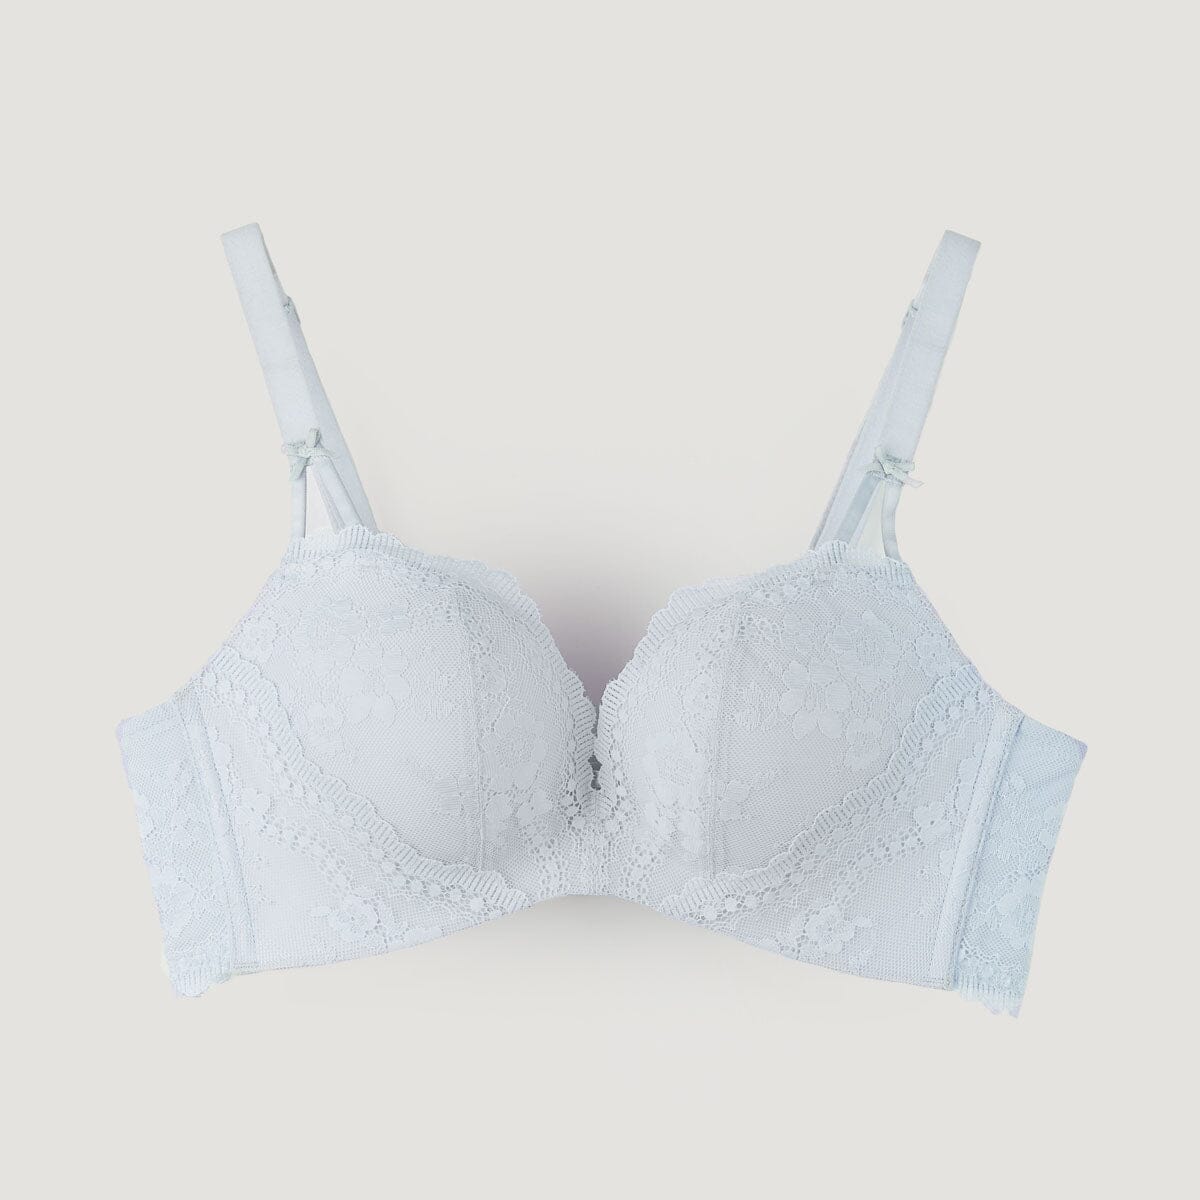 Sustainable REherbafoam??? W-Shape support Butterfly Push Up Lace Bra Bra Her Own Words Arctic Ice 70B 